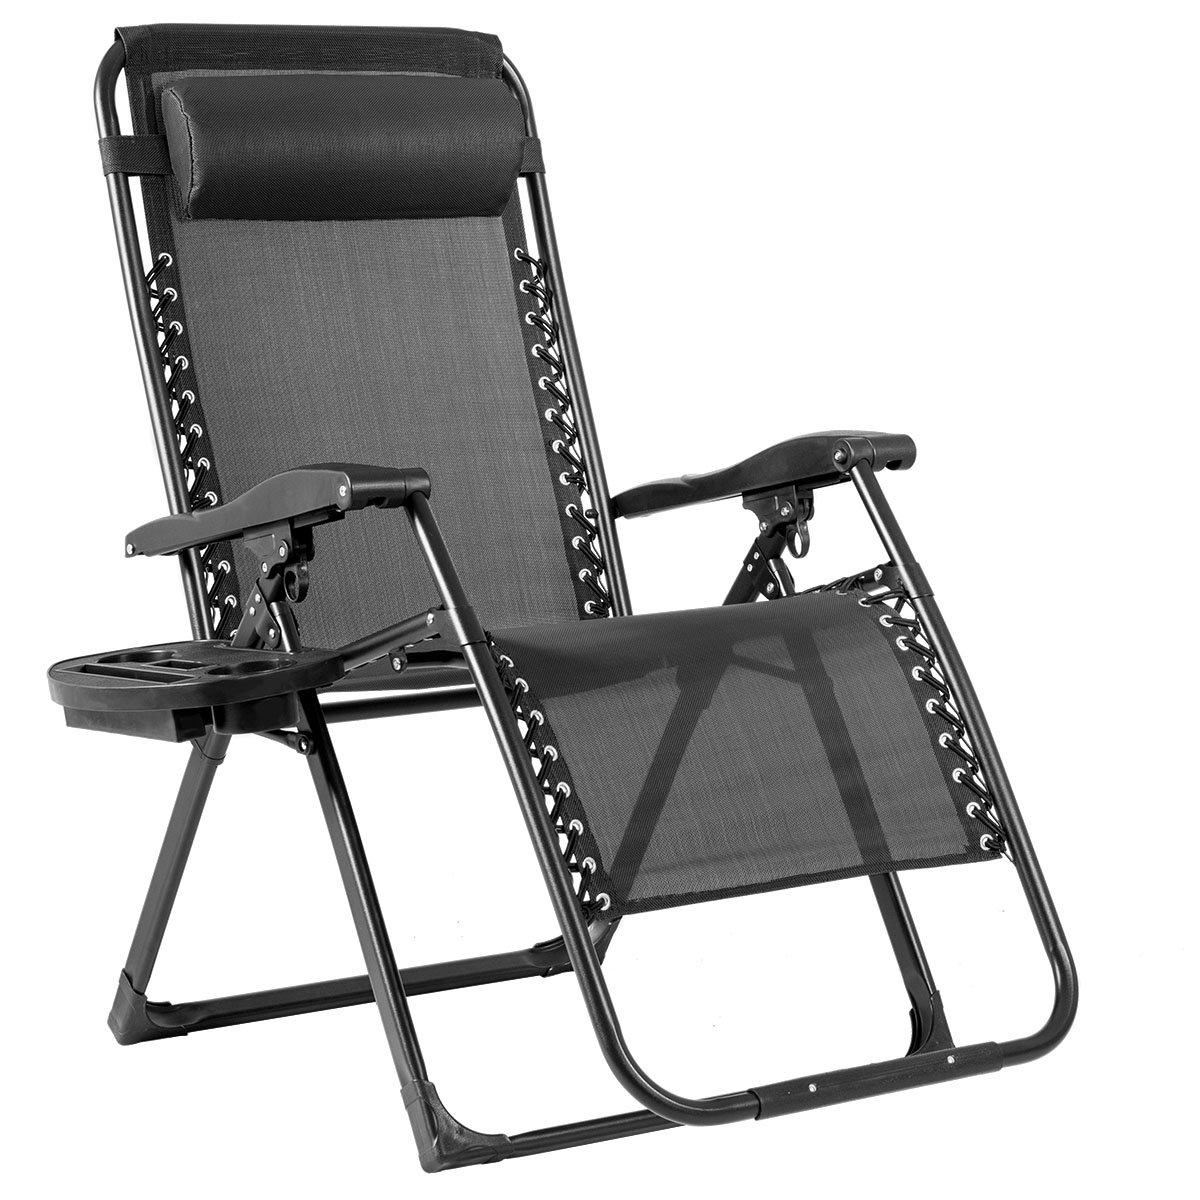 Folding Zero Gravity Chair Lounge Chaise Chair Recliner with Detachable Headrest